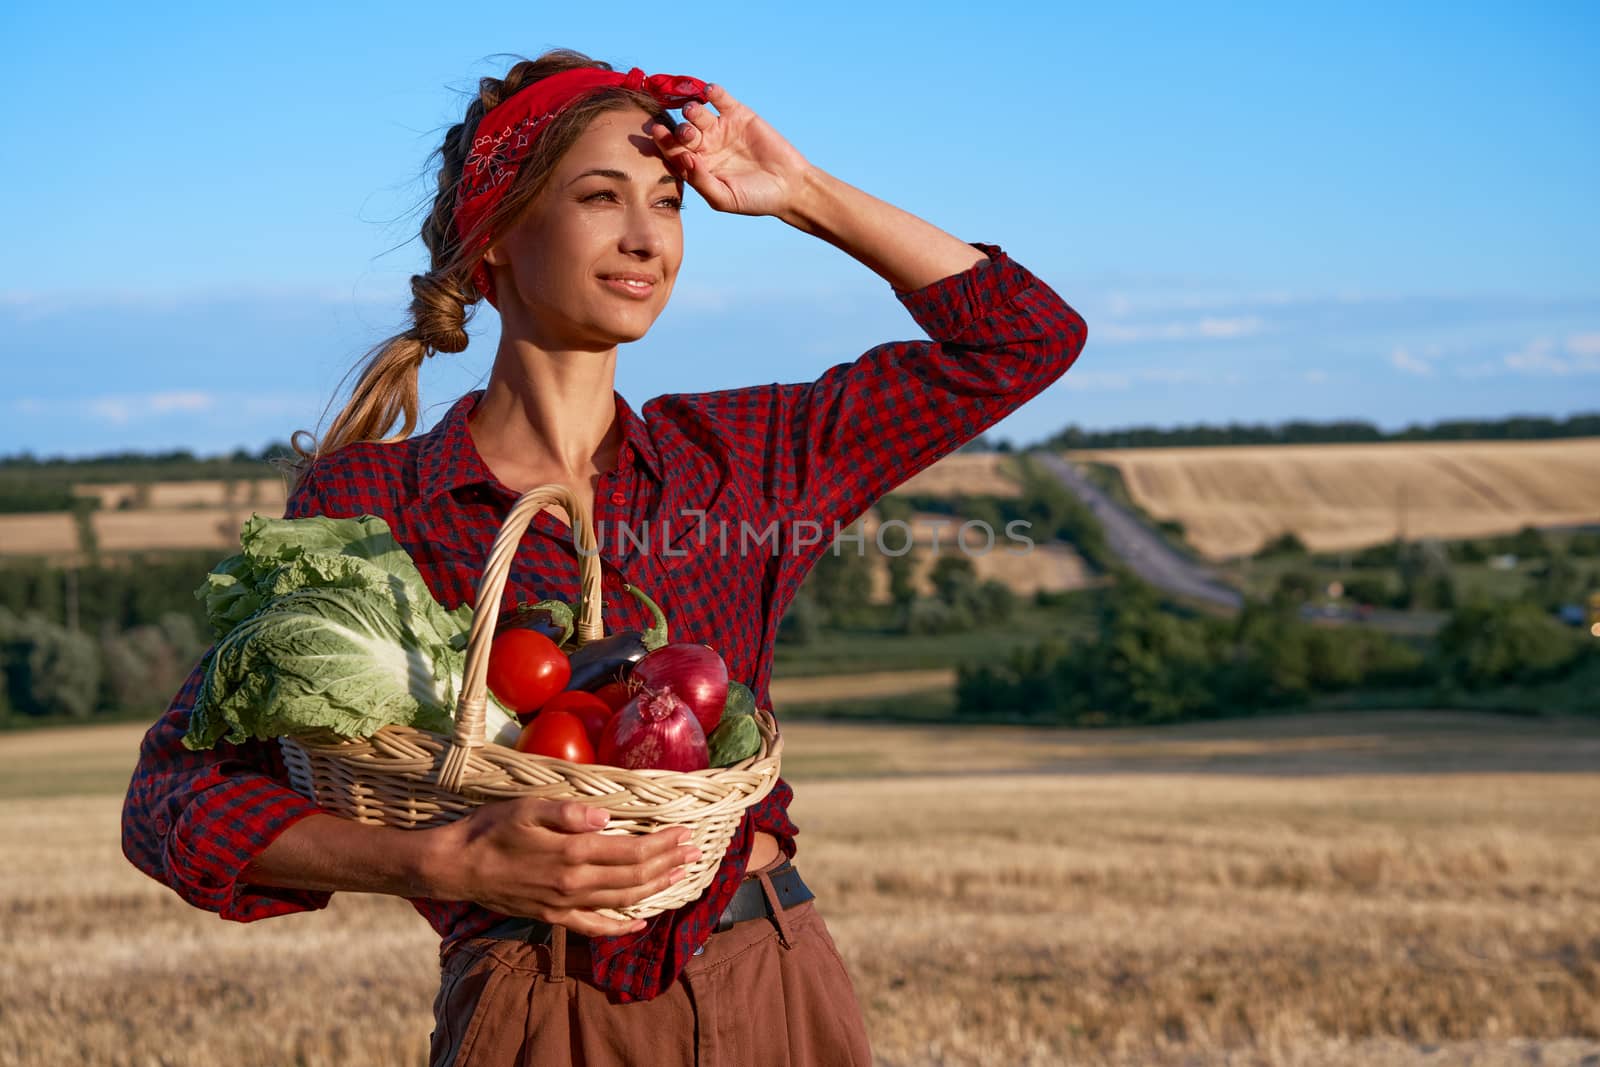 Woman farmer holding basket vegetable onion tomato salad cucumber standing farmland smiling Female agronomist specialist farming agribusiness Pretty girl dressed red checkered shirt and bandana